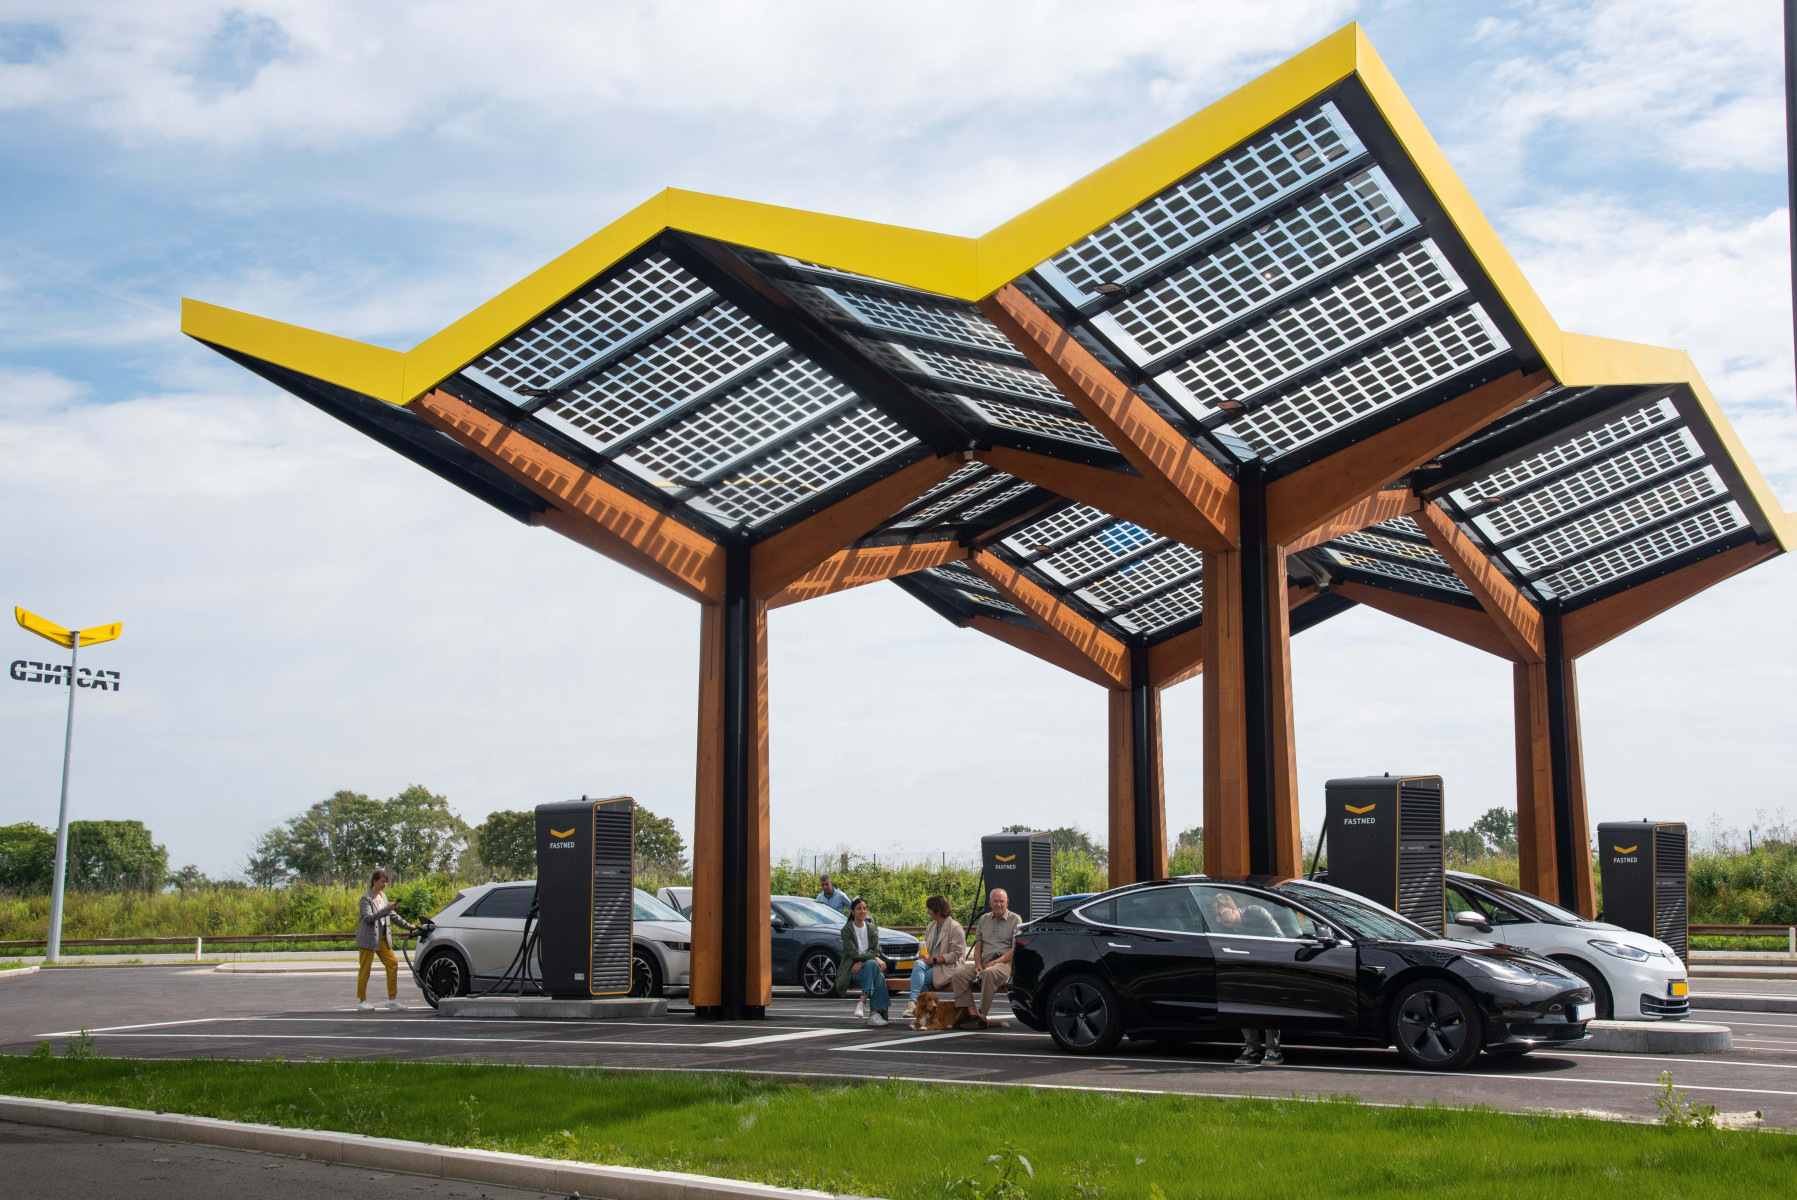 Most Fastned stations feature the company’s iconic solar canopies that help EV drivers to easily locate the site and stay dry while charging. Photo: Fastned